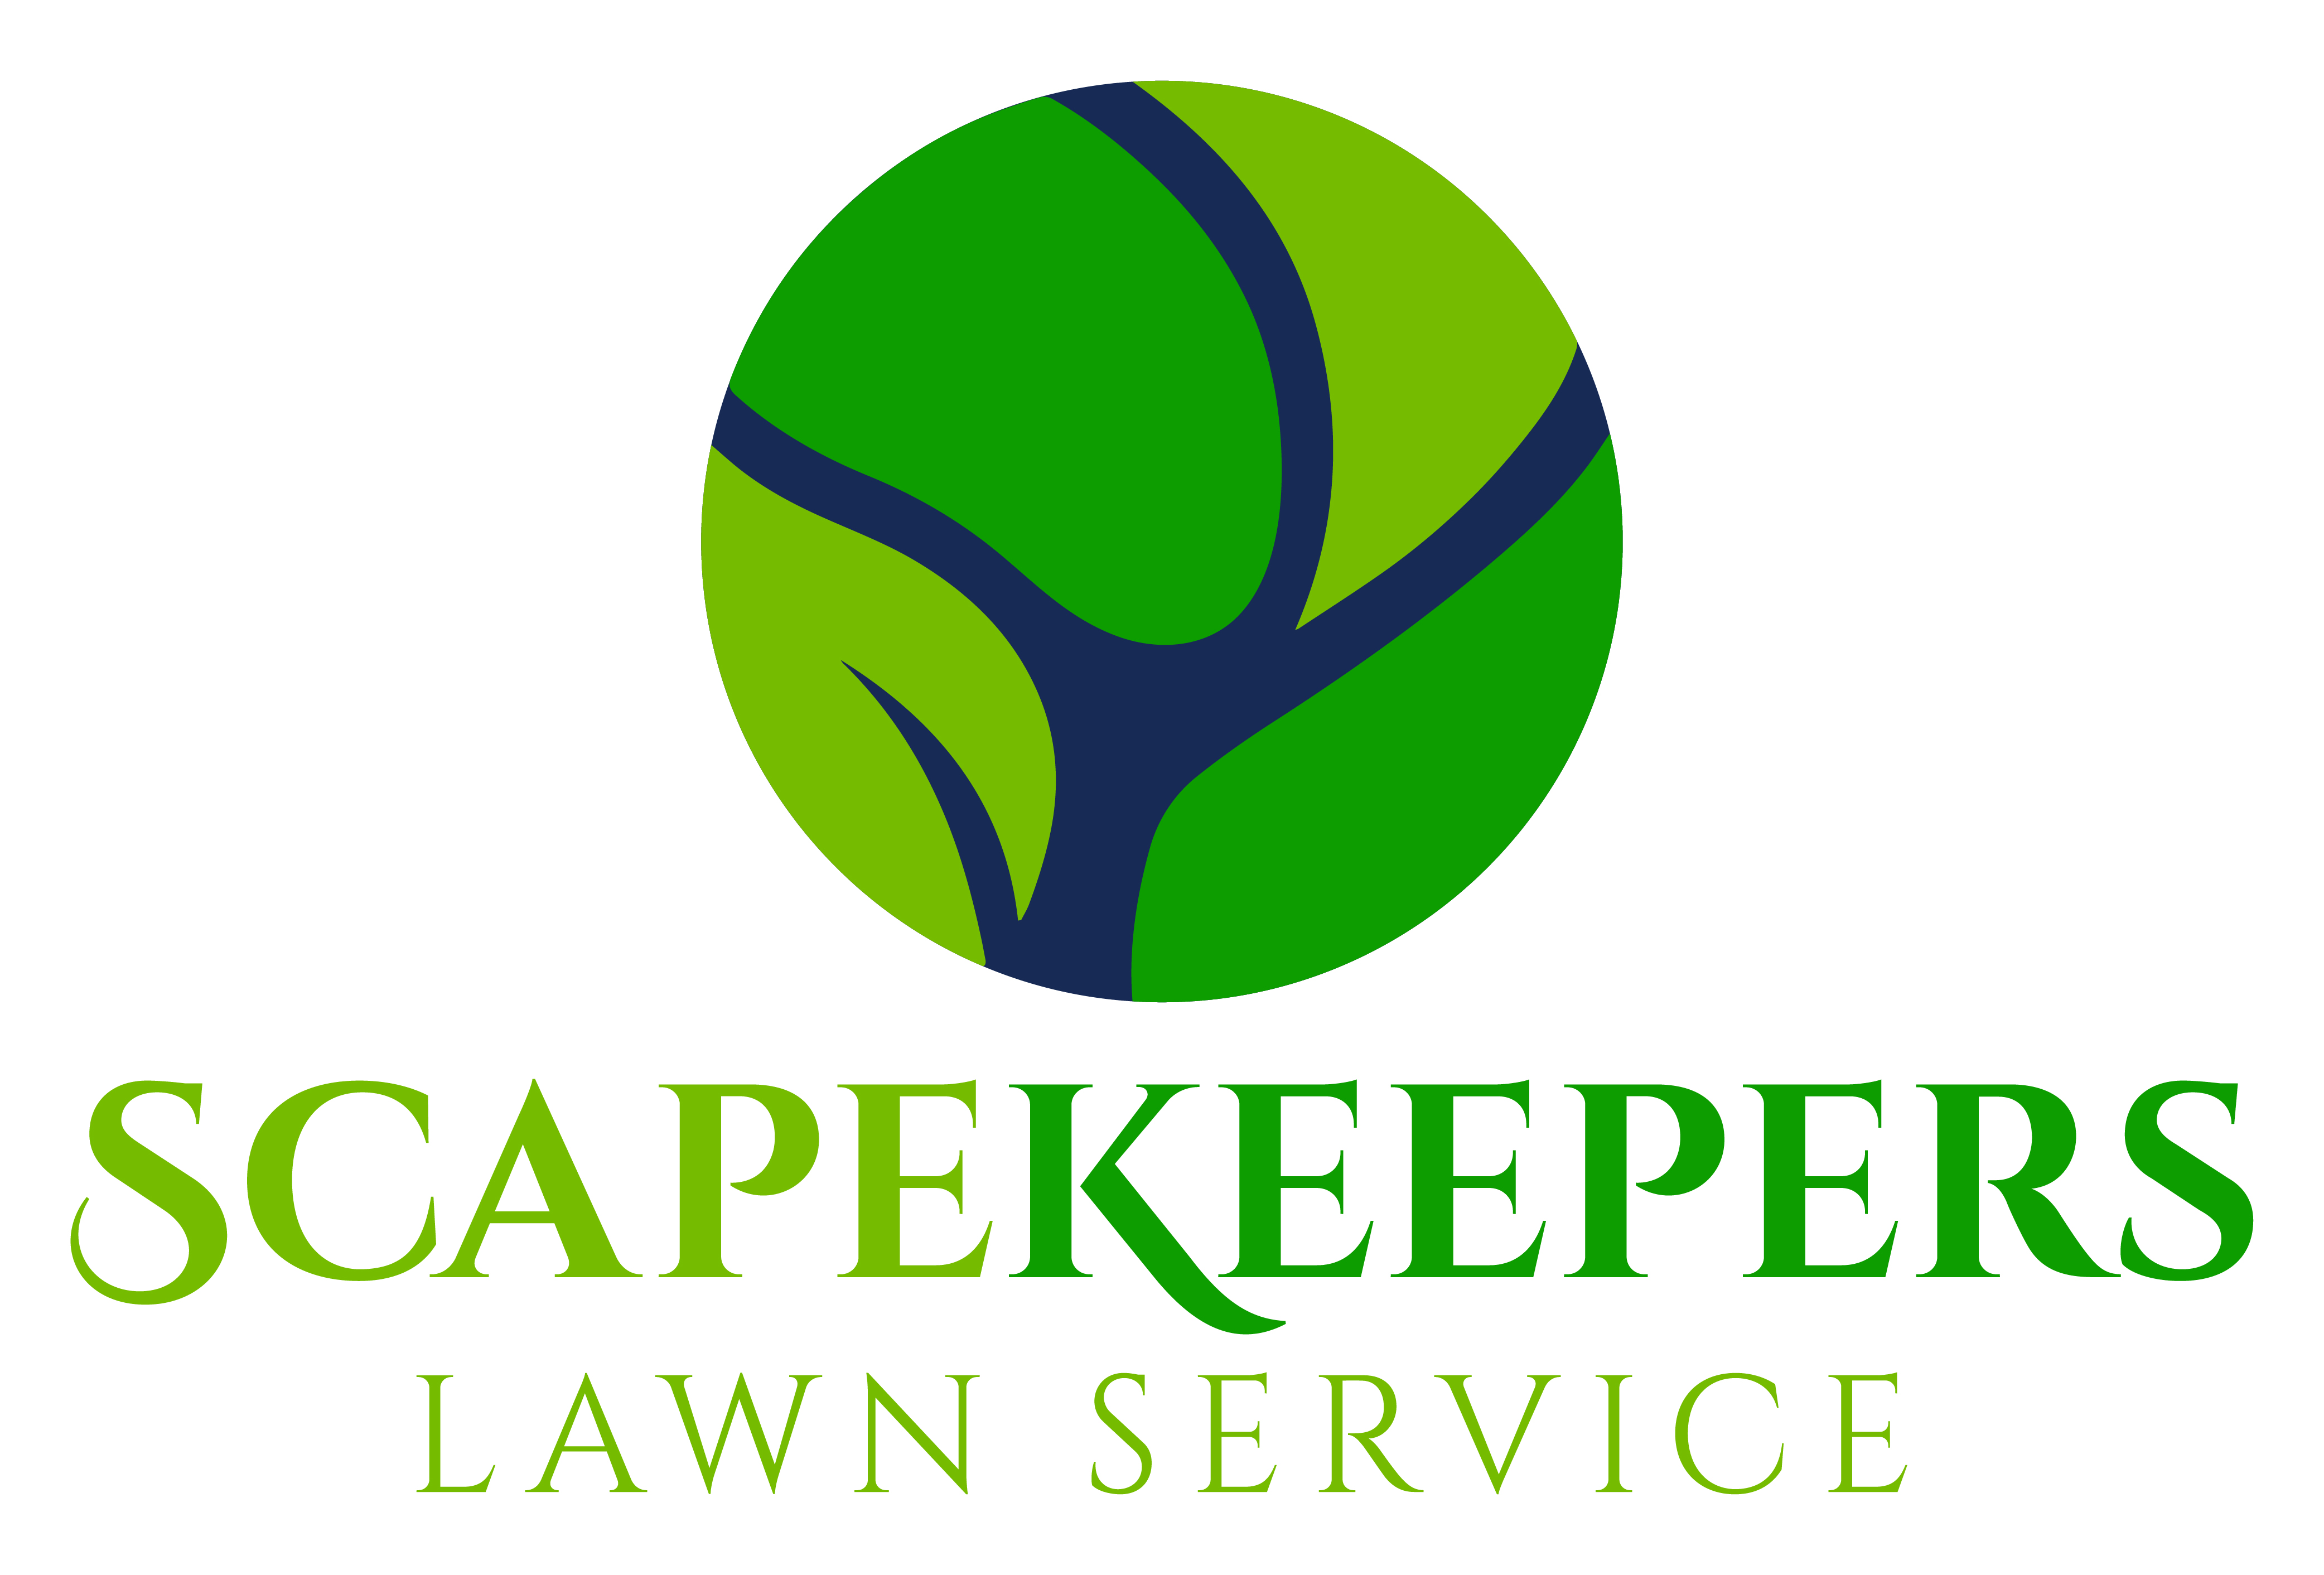 ScapeKeepers Lawn Service Logo